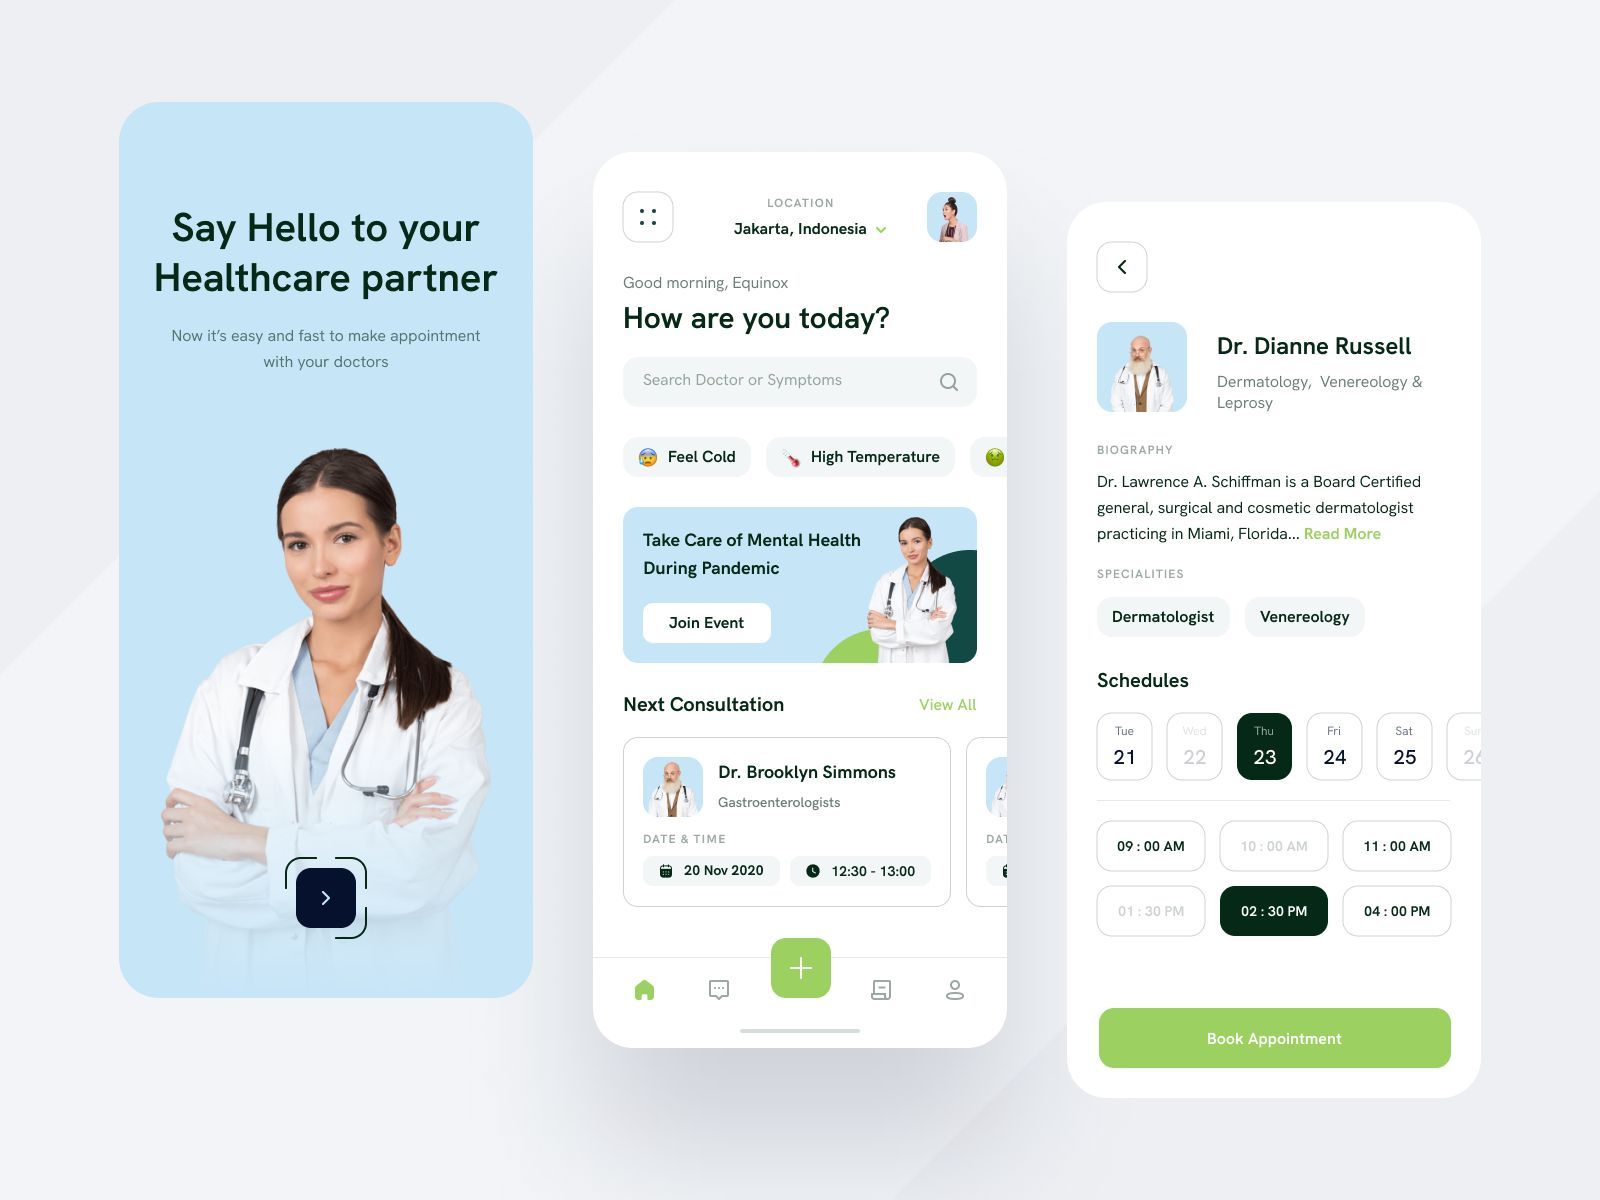 Adding healthcare-related images to the app design